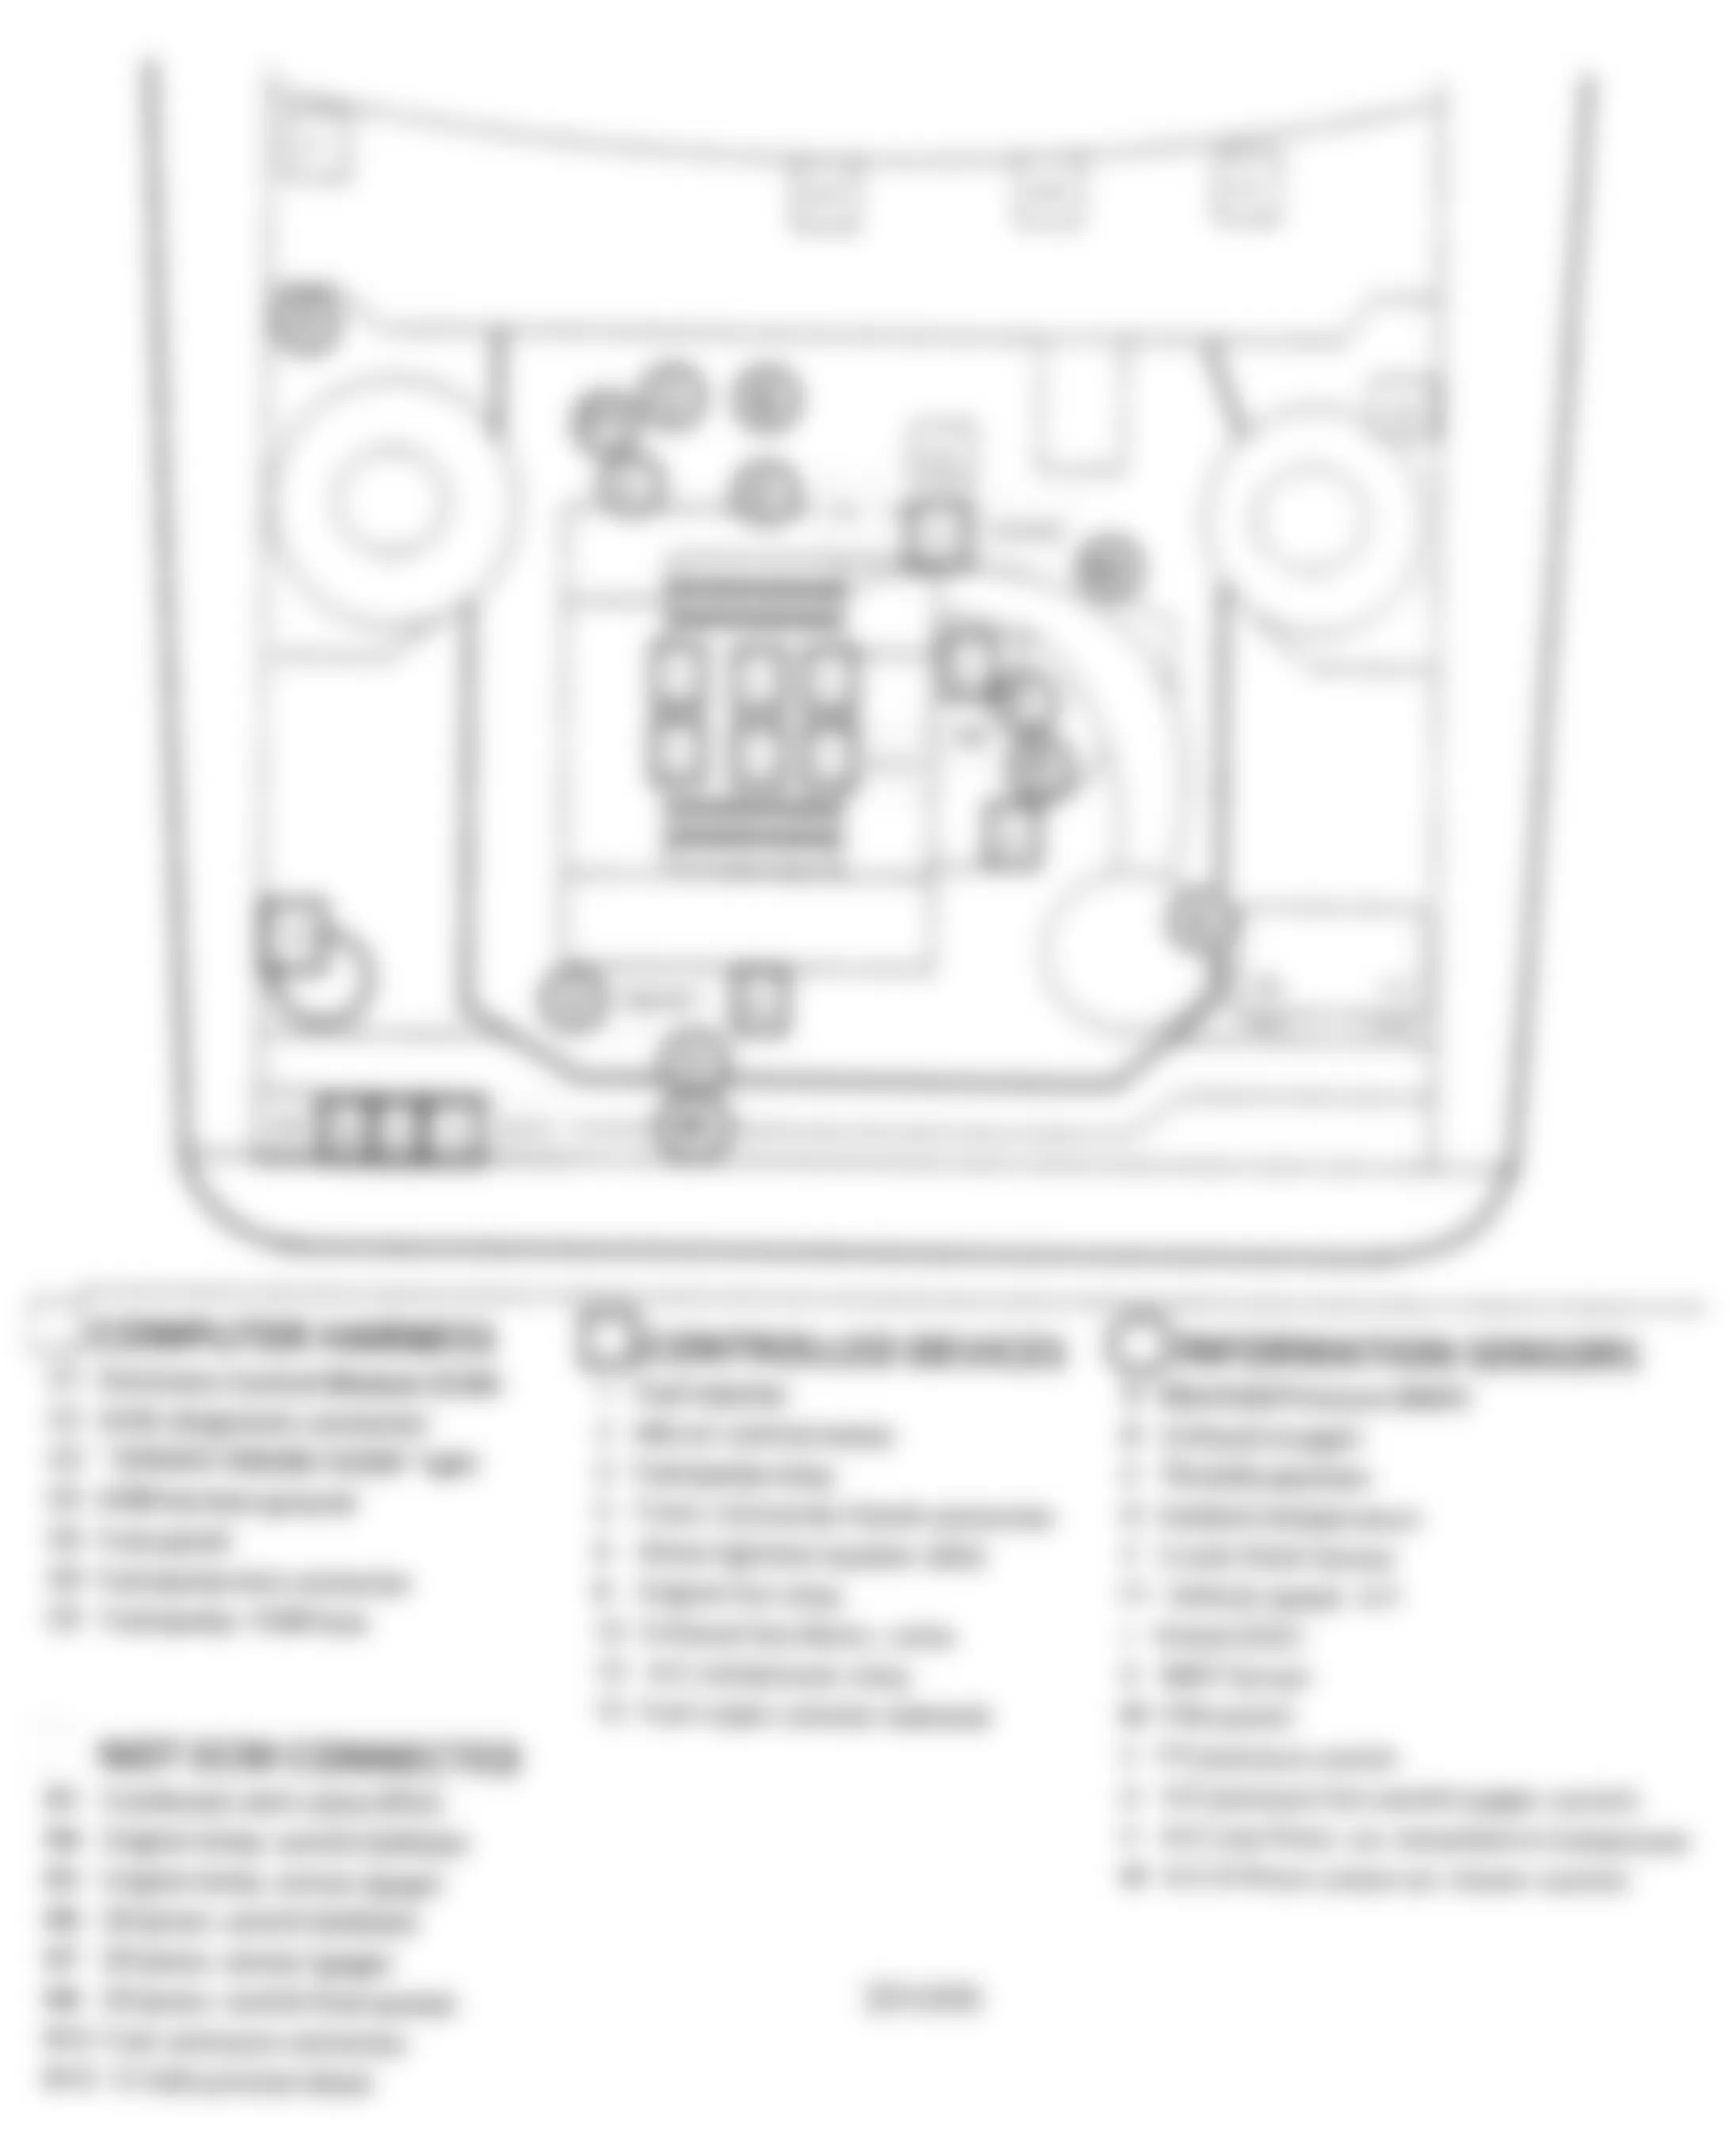 Buick Century Limited 1990 - Component Locations -  Component Locations (3 Of 6)